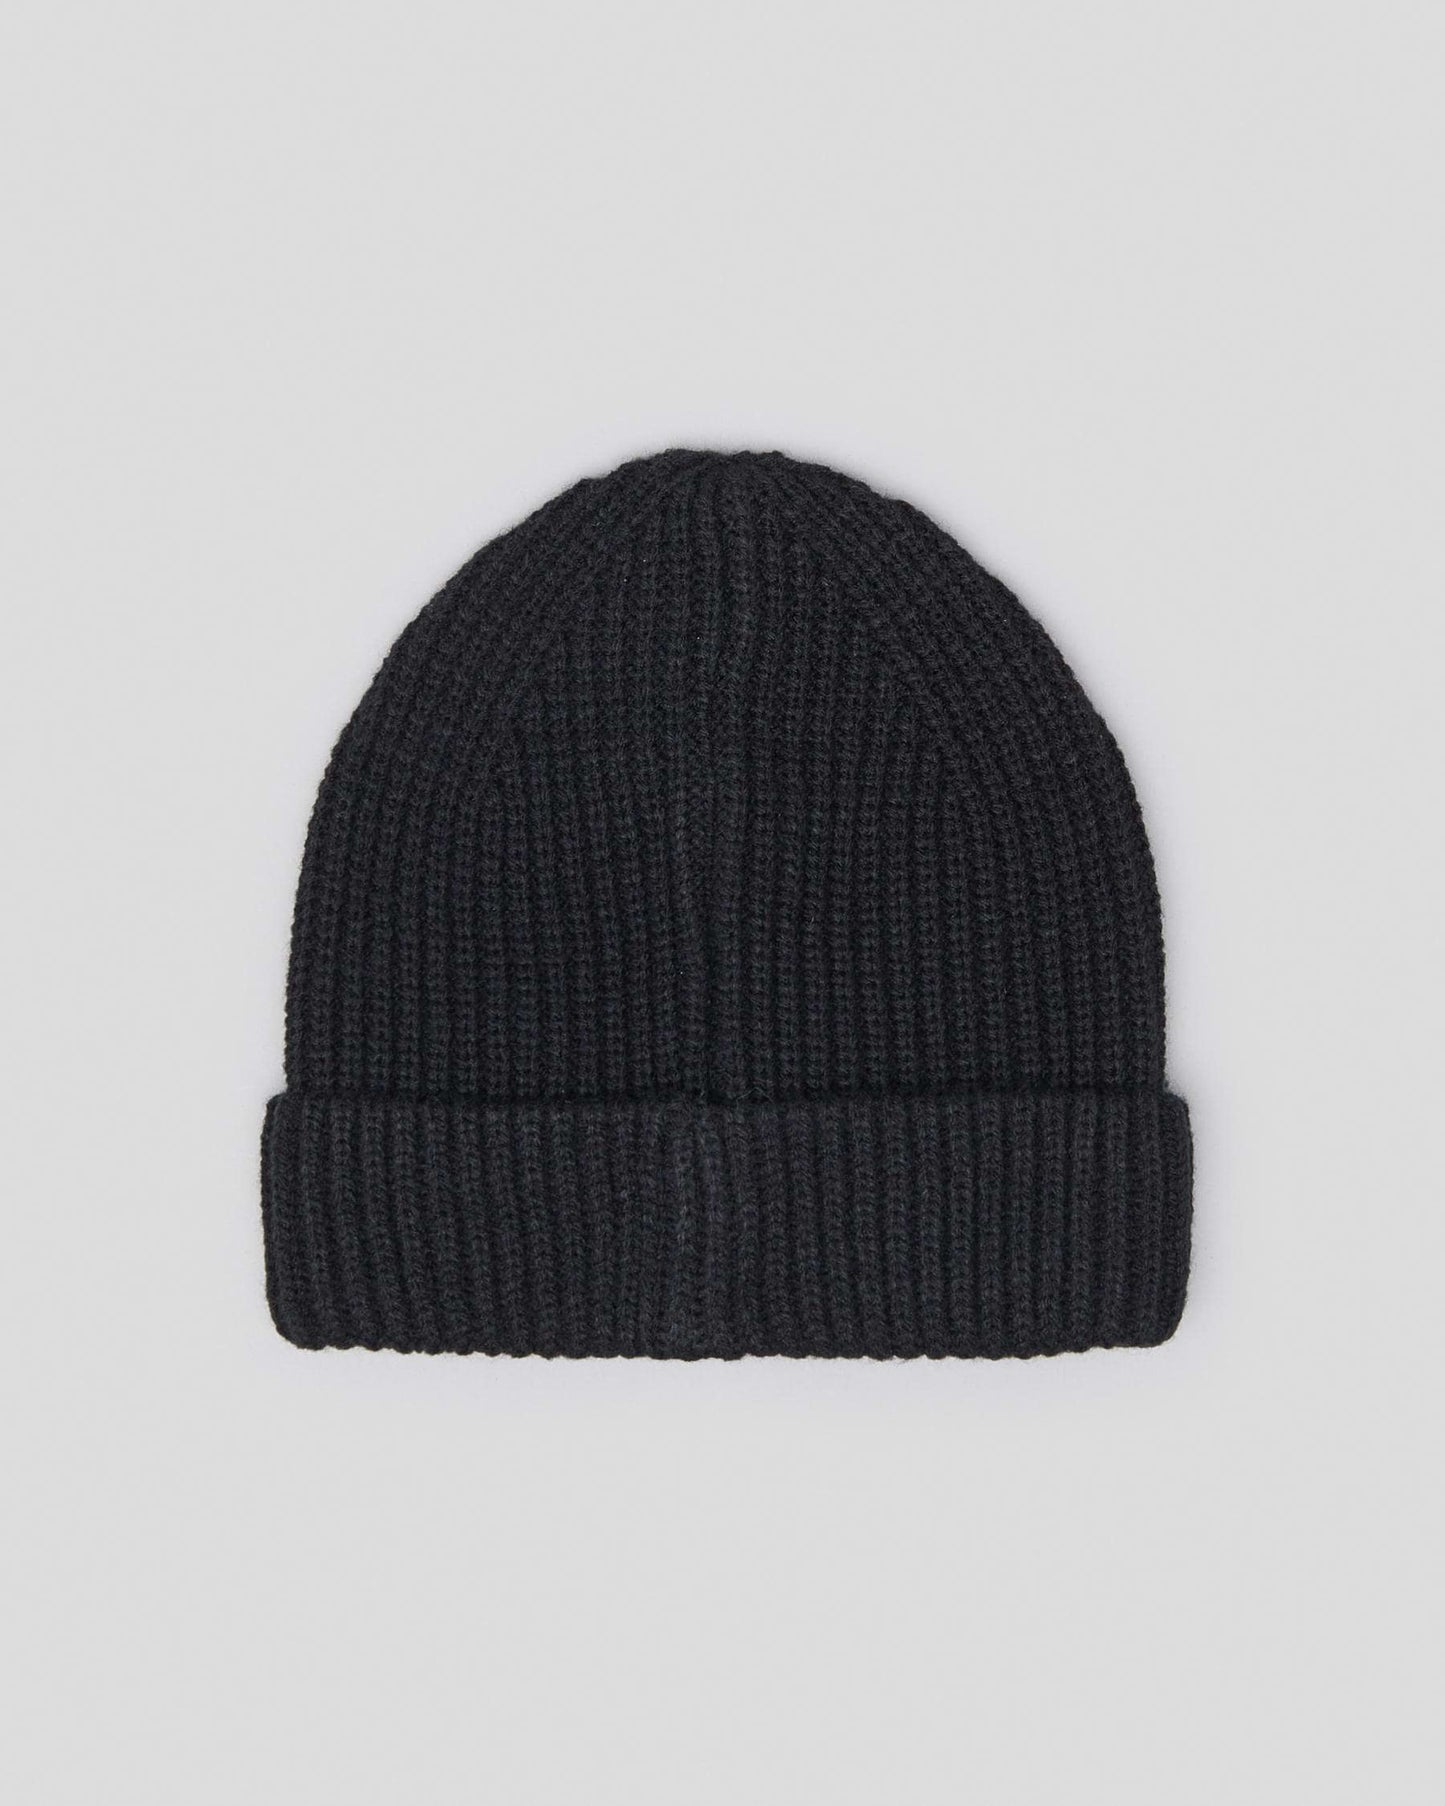 THE MAD HUEYS Anchor Roll Up Youth Beanie - Black